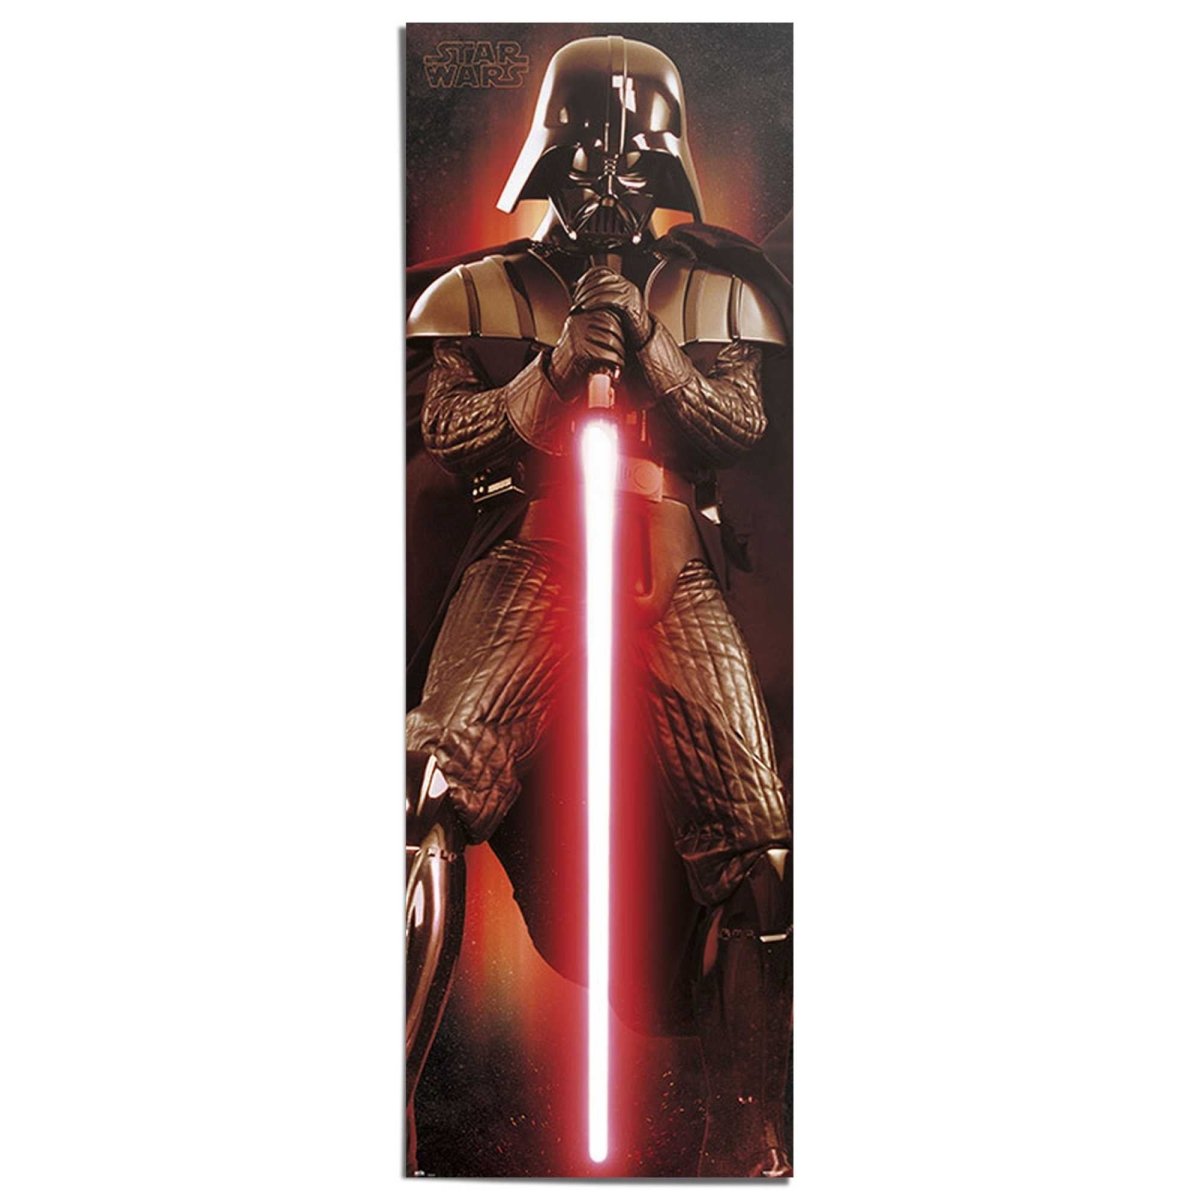 Poster Star Wars - classic darth vader 158x53 - Reinders